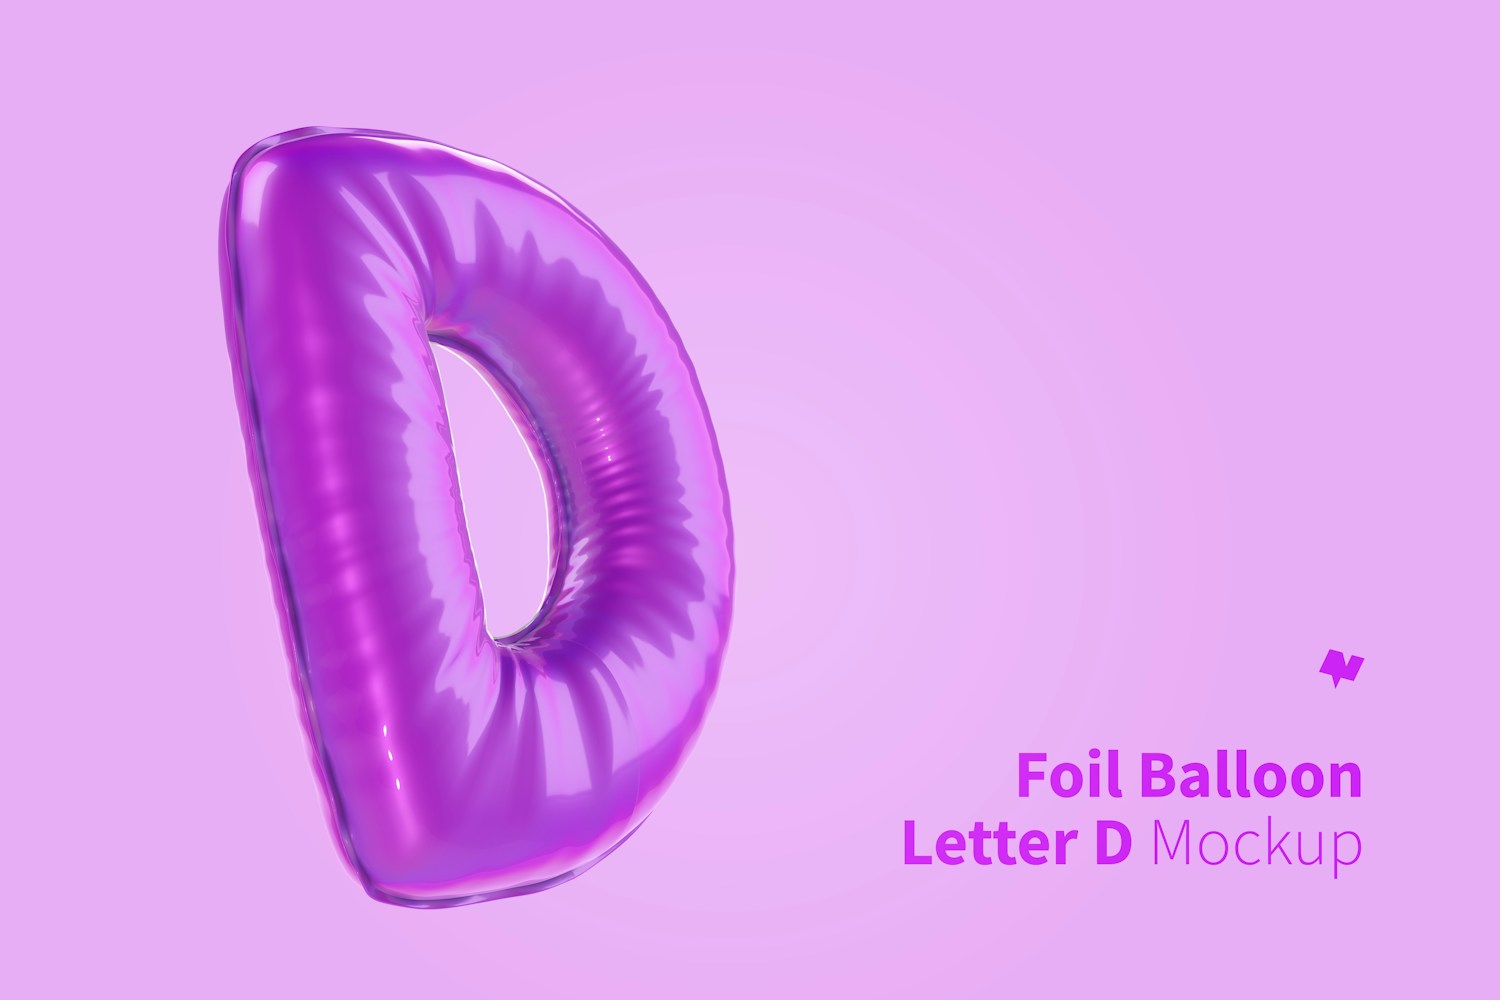 Use any color for the balloon without losing its metallic effect.